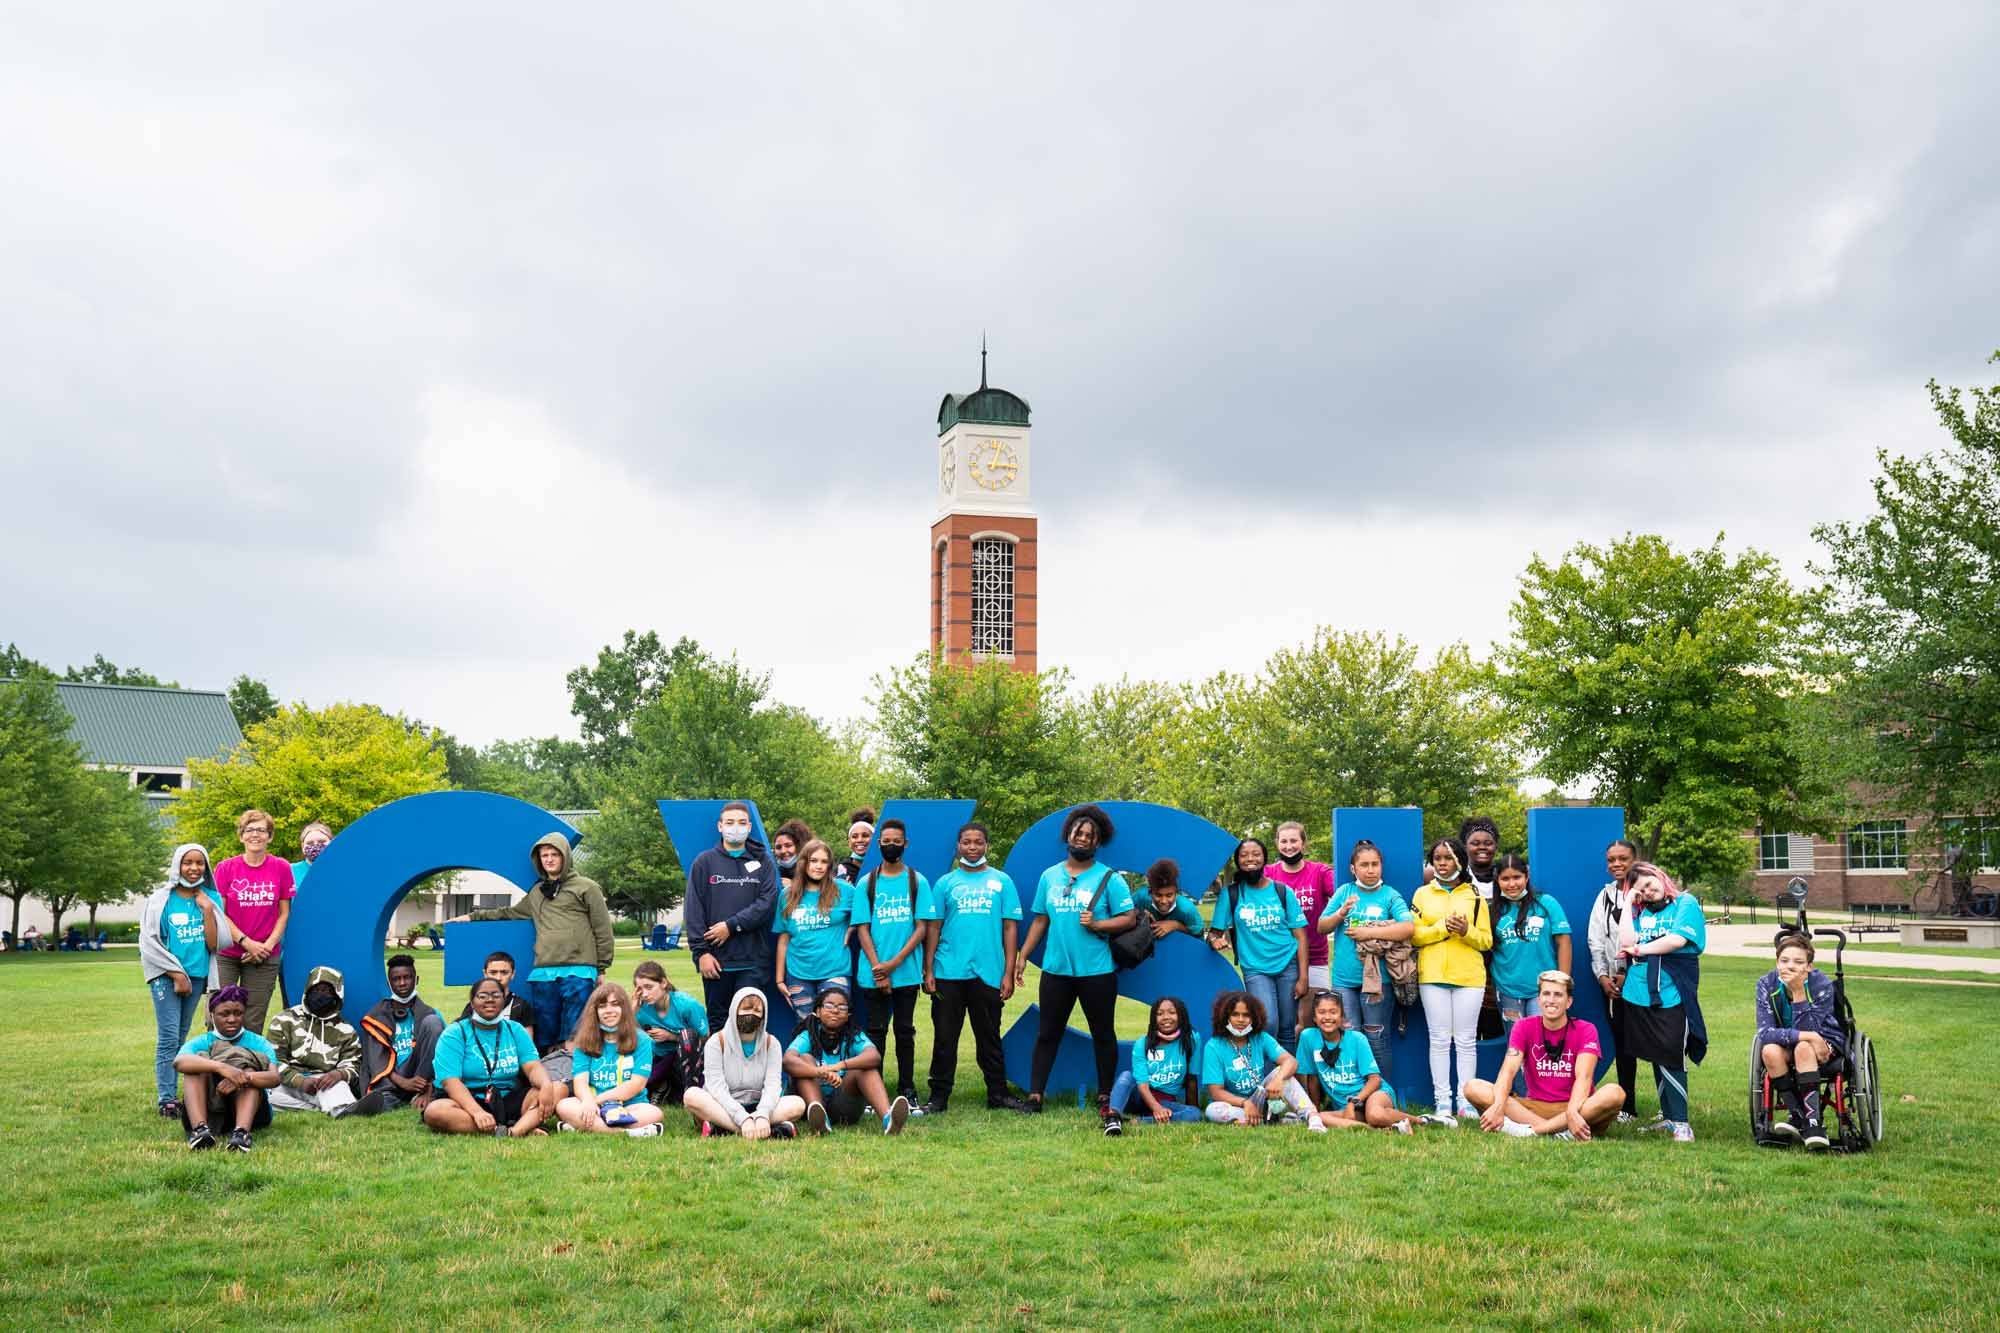 sHaPe Campers visit the GVSU Allendale campus and stand in front of the clock tower